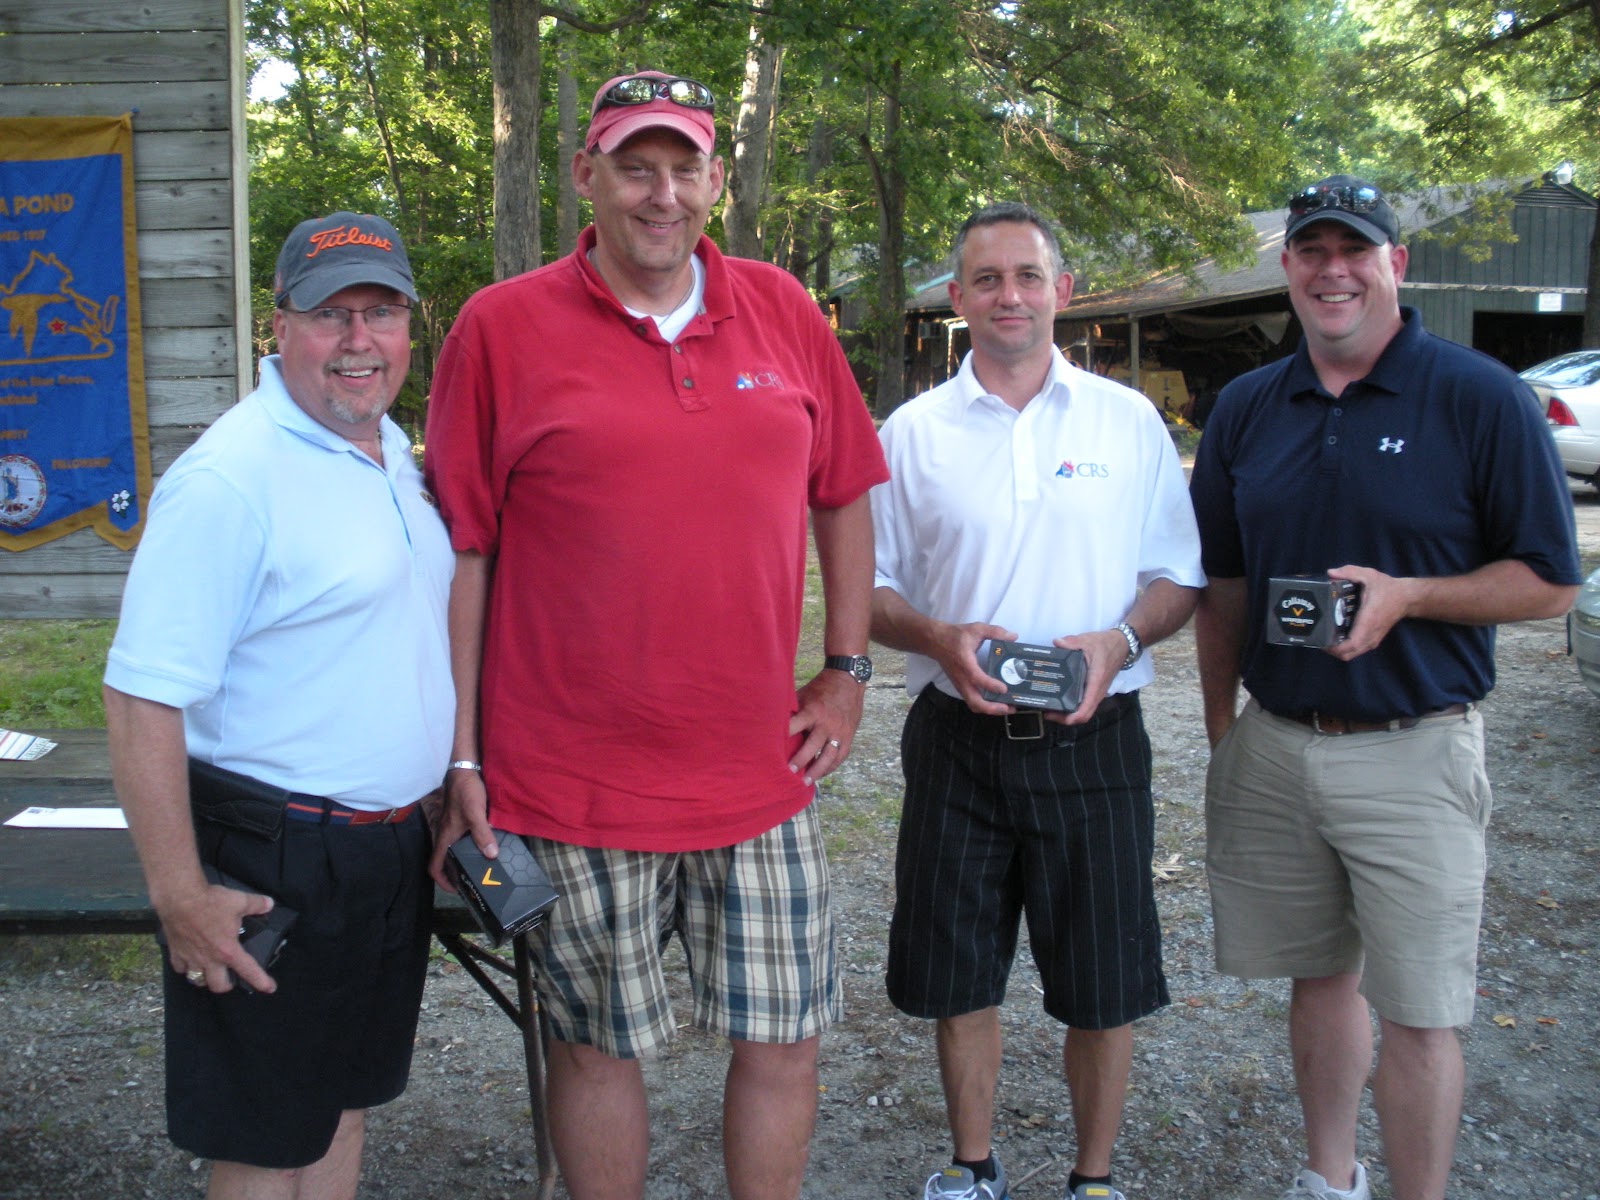 Virginia Pond's 11th Annual Spring Charity Golf